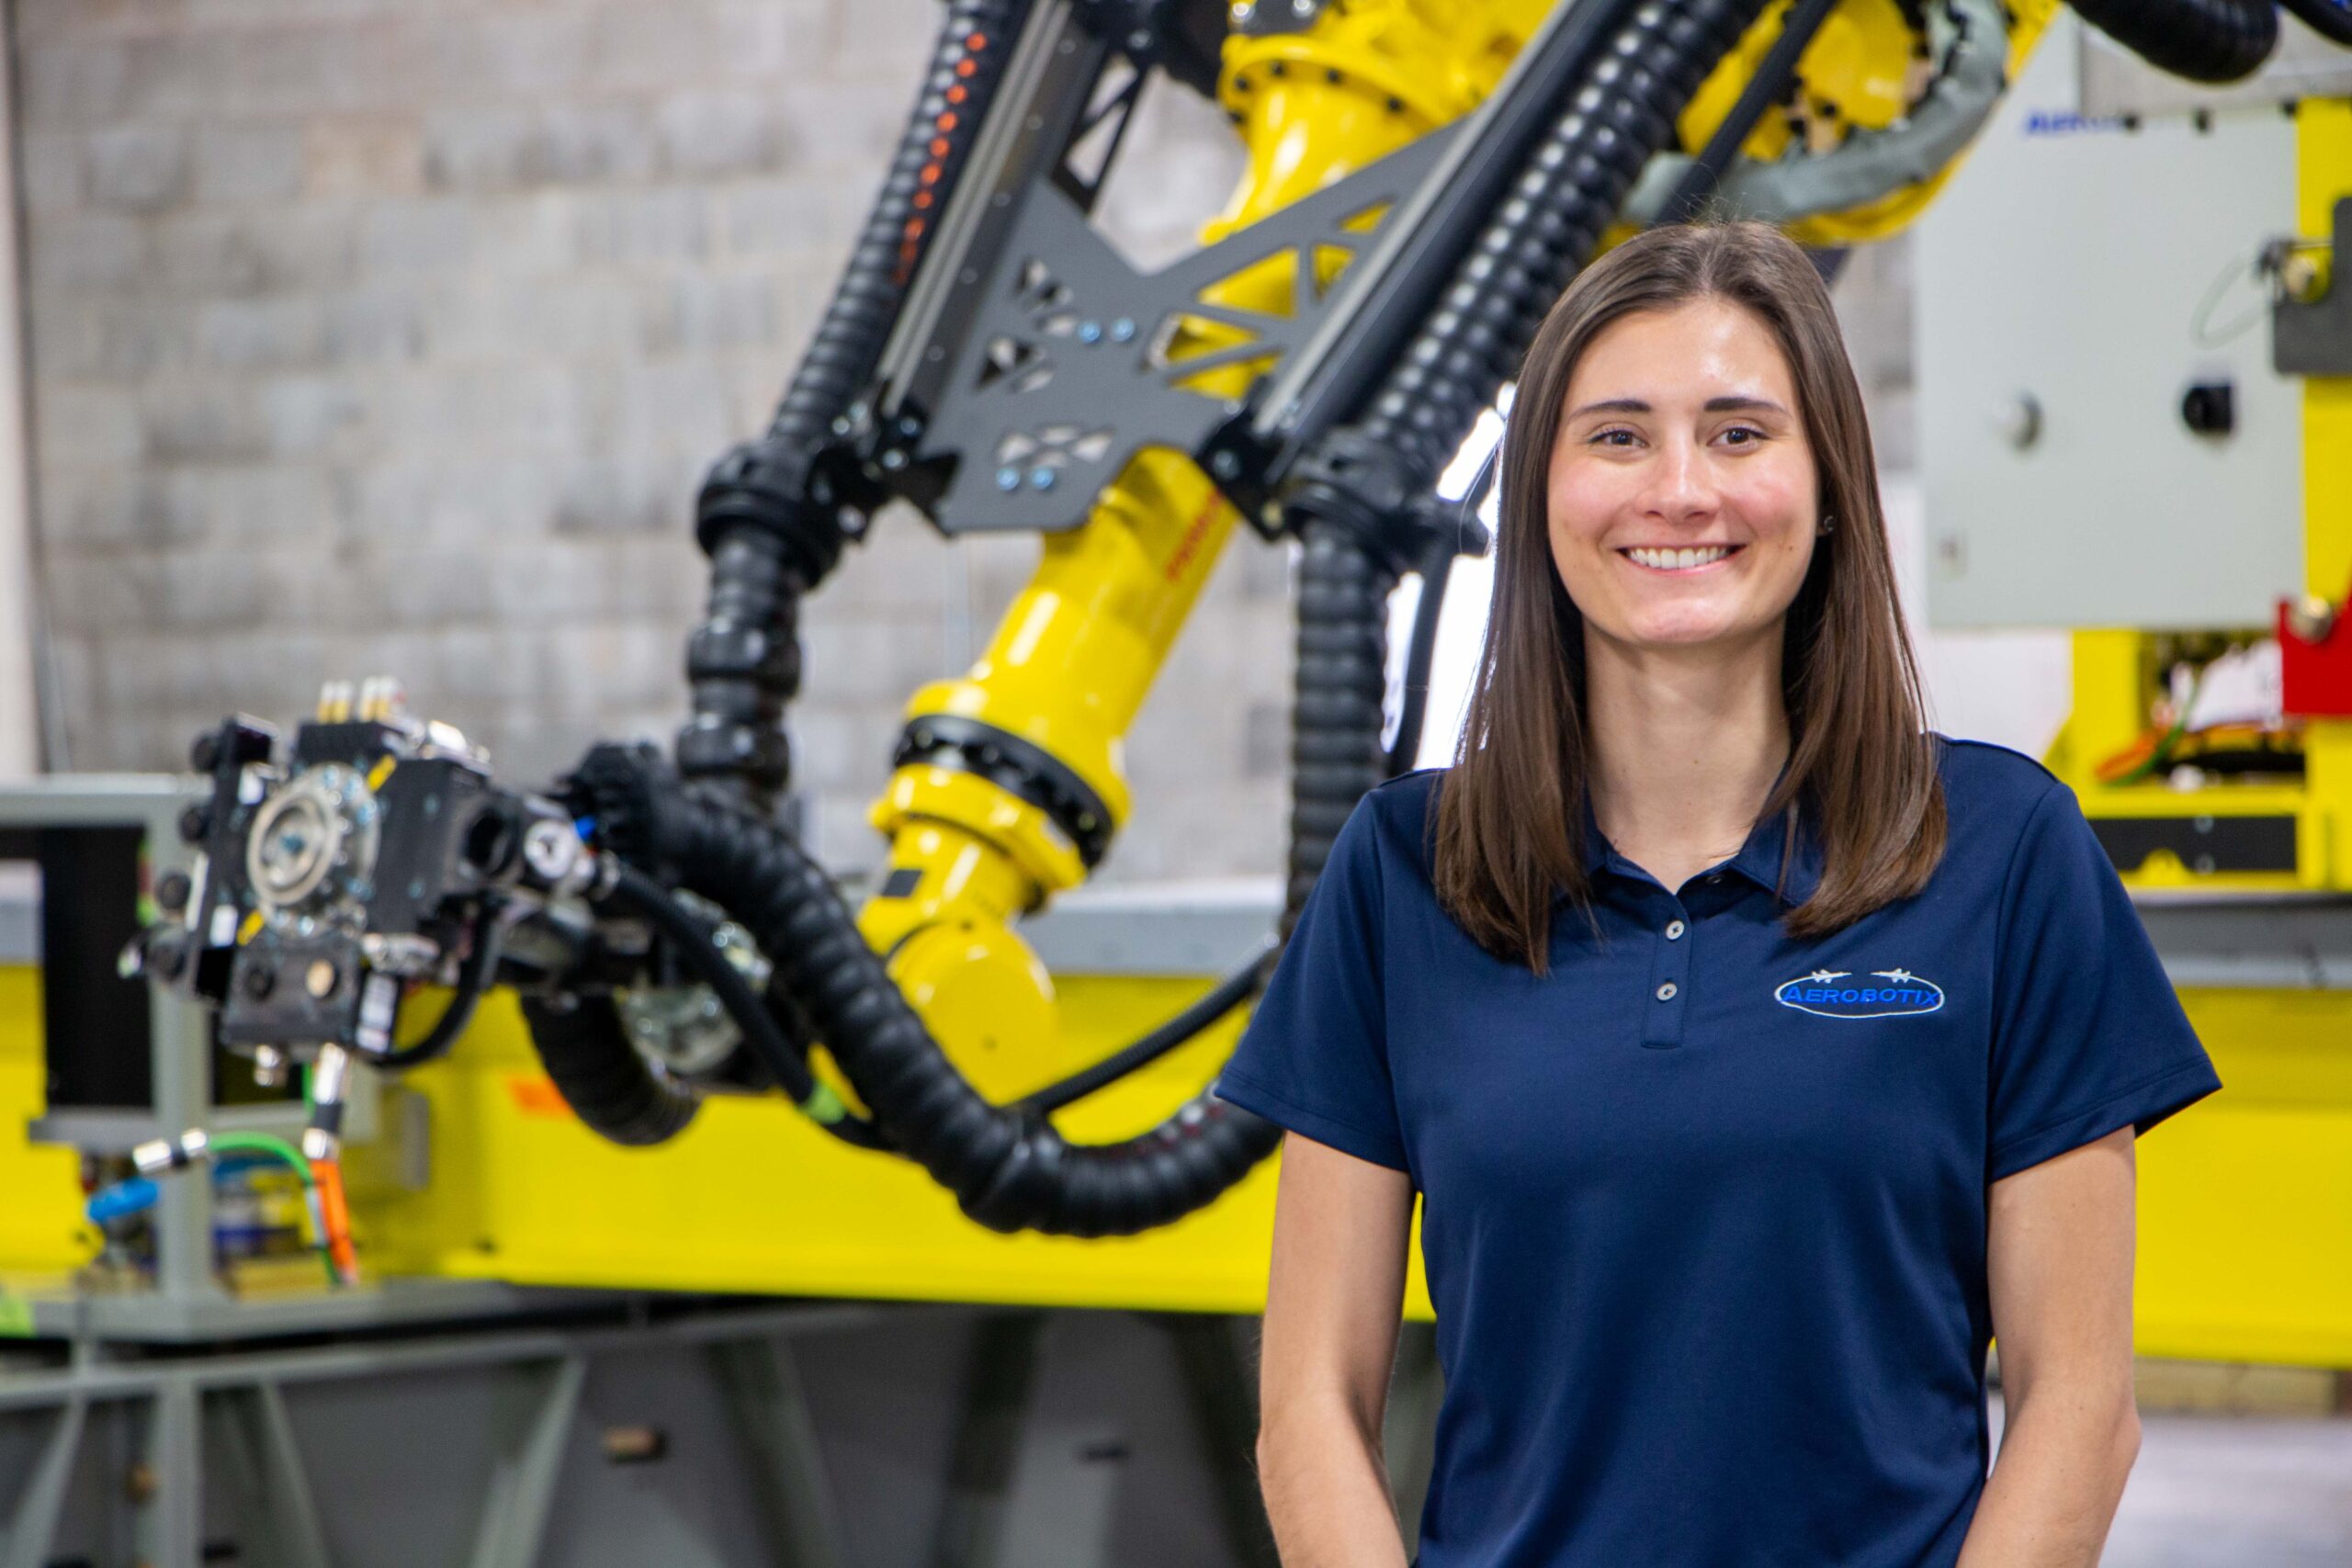 Process Engineer Sammy Stejskal selected as a Women in Tech: 23 for '23 by Business Alabama.